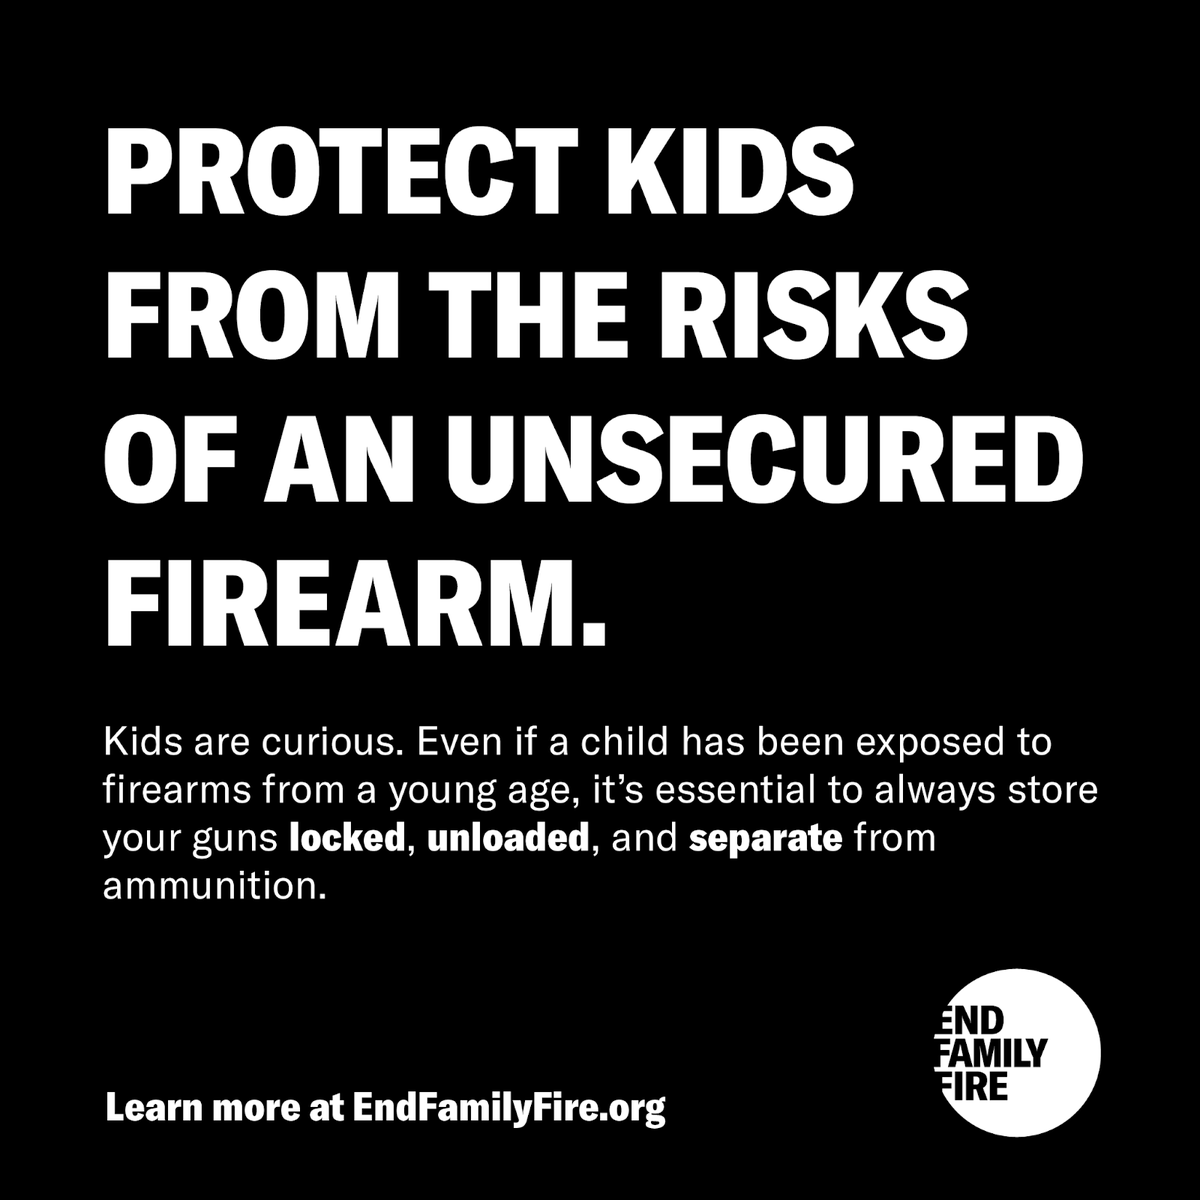 Kids are naturally curious about everything, and safe firearm storage helps prevent their curiosity from turning into tragedy. You can help #EndFamilyFire by storing your guns locked, unloaded, and away from ammo. Learn more about safe storage methods: endfamilyfire.org